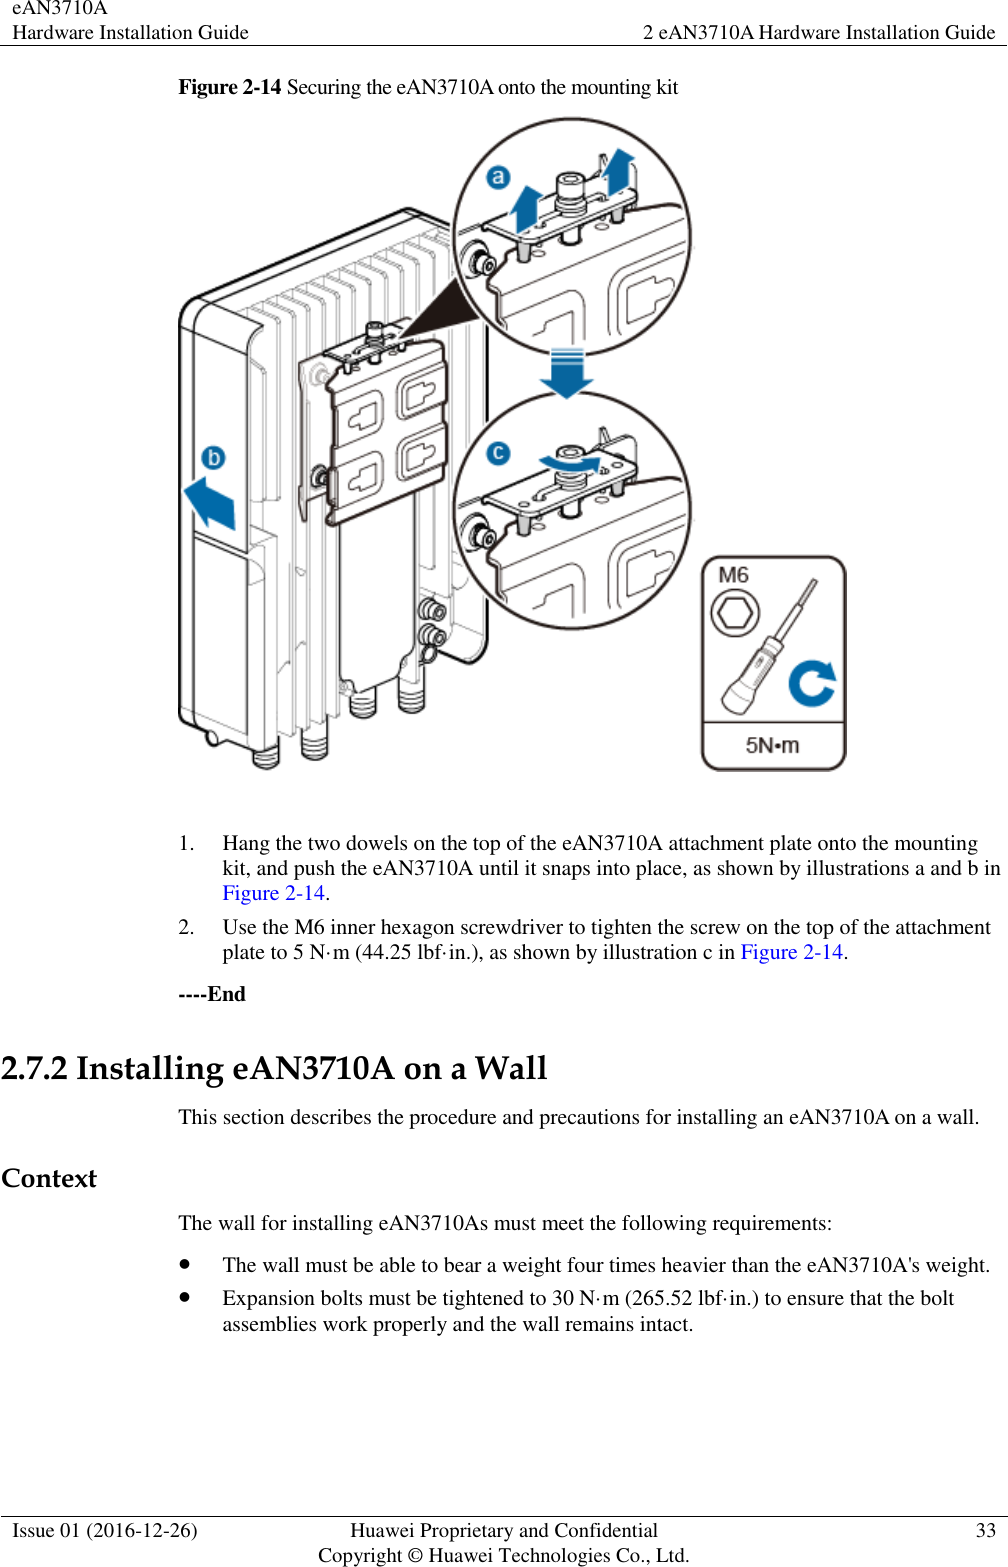 eAN3710A Hardware Installation Guide 2 eAN3710A Hardware Installation Guide  Issue 01 (2016-12-26) Huawei Proprietary and Confidential                                     Copyright © Huawei Technologies Co., Ltd. 33  Figure 2-14 Securing the eAN3710A onto the mounting kit   1. Hang the two dowels on the top of the eAN3710A attachment plate onto the mounting kit, and push the eAN3710A until it snaps into place, as shown by illustrations a and b in Figure 2-14. 2. Use the M6 inner hexagon screwdriver to tighten the screw on the top of the attachment plate to 5 N·m (44.25 lbf·in.), as shown by illustration c in Figure 2-14. ----End 2.7.2 Installing eAN3710A on a Wall This section describes the procedure and precautions for installing an eAN3710A on a wall. Context The wall for installing eAN3710As must meet the following requirements:  The wall must be able to bear a weight four times heavier than the eAN3710A&apos;s weight.  Expansion bolts must be tightened to 30 N·m (265.52 lbf·in.) to ensure that the bolt assemblies work properly and the wall remains intact.  